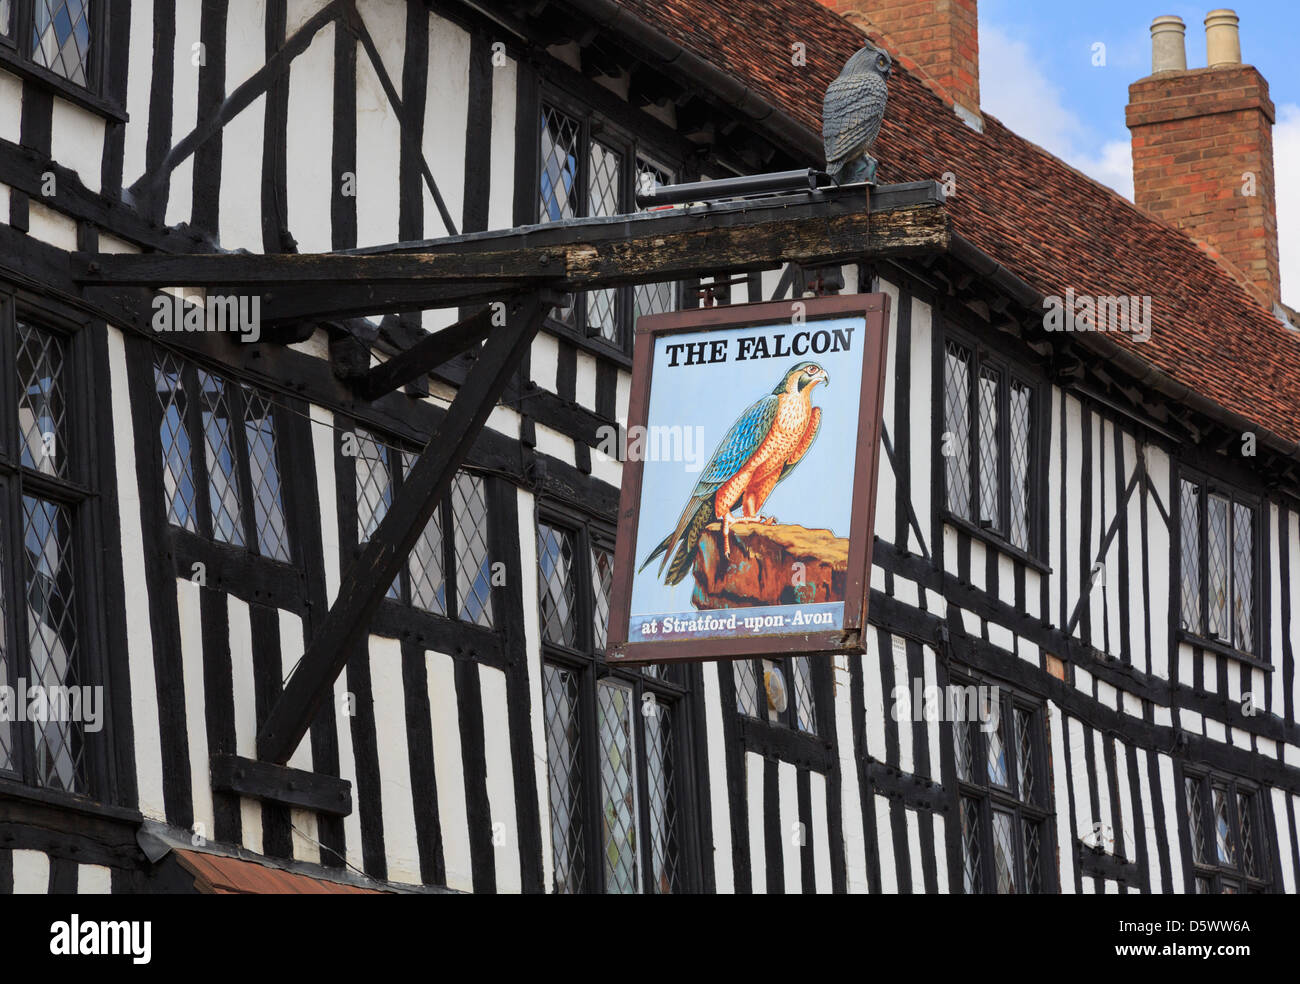 Pub sign for the Legacy Falcon Hotel 16th century black and white timbered building Stratford-upon-Avon Warwickshire England UK Great Britain Stock Photo